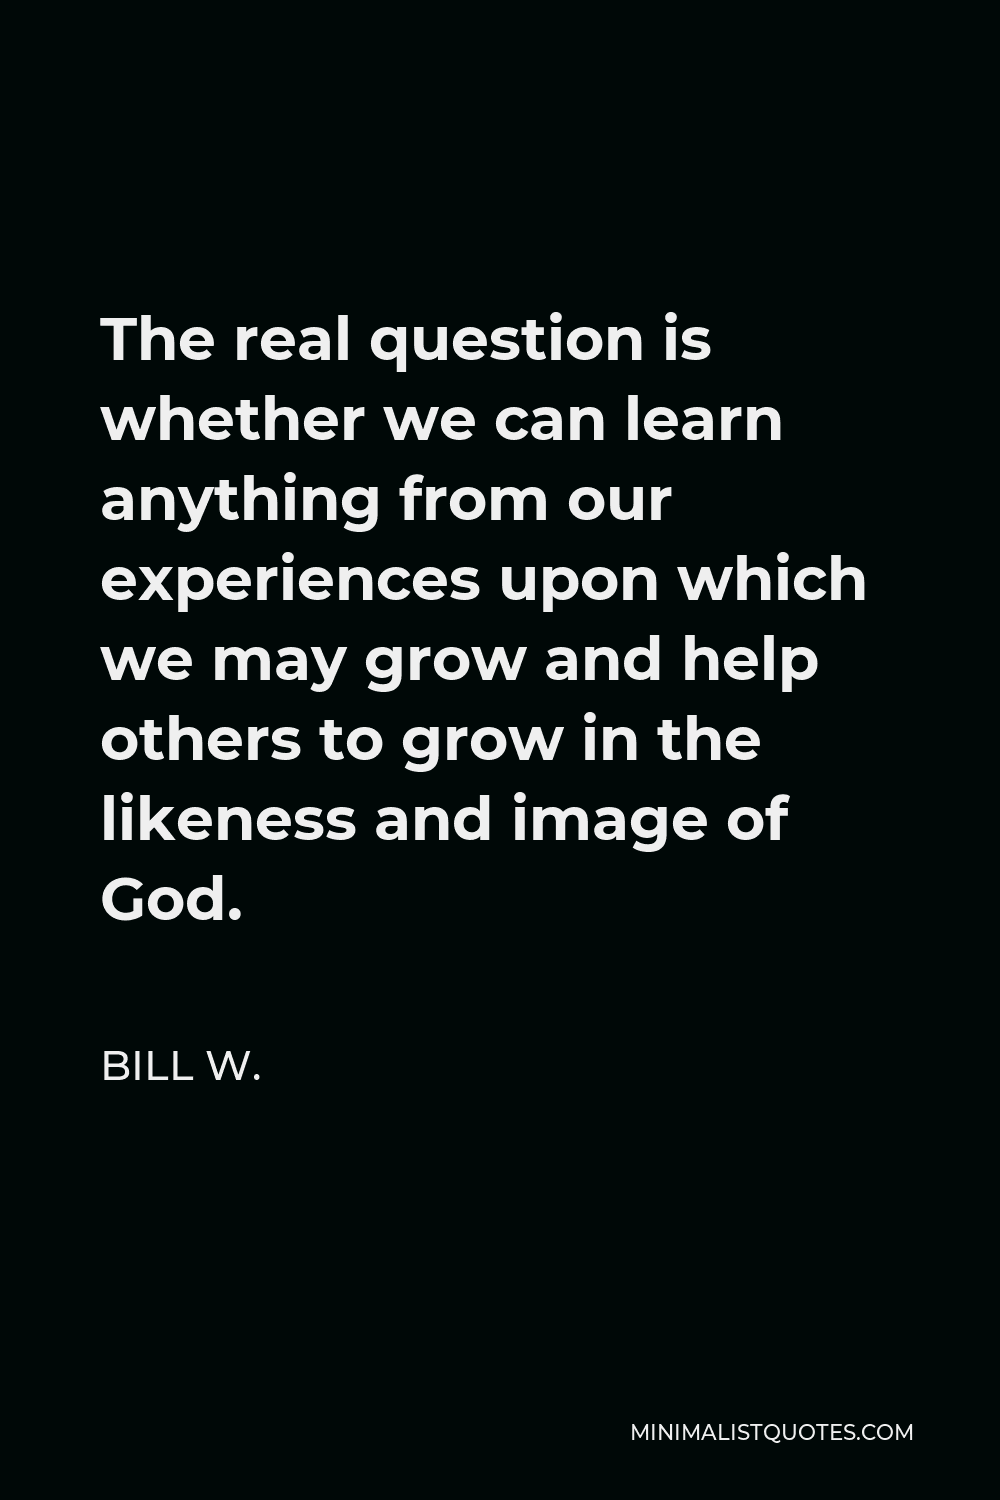 Bill W. Quote - The real question is whether we can learn anything from our experiences upon which we may grow and help others to grow in the likeness and image of God.